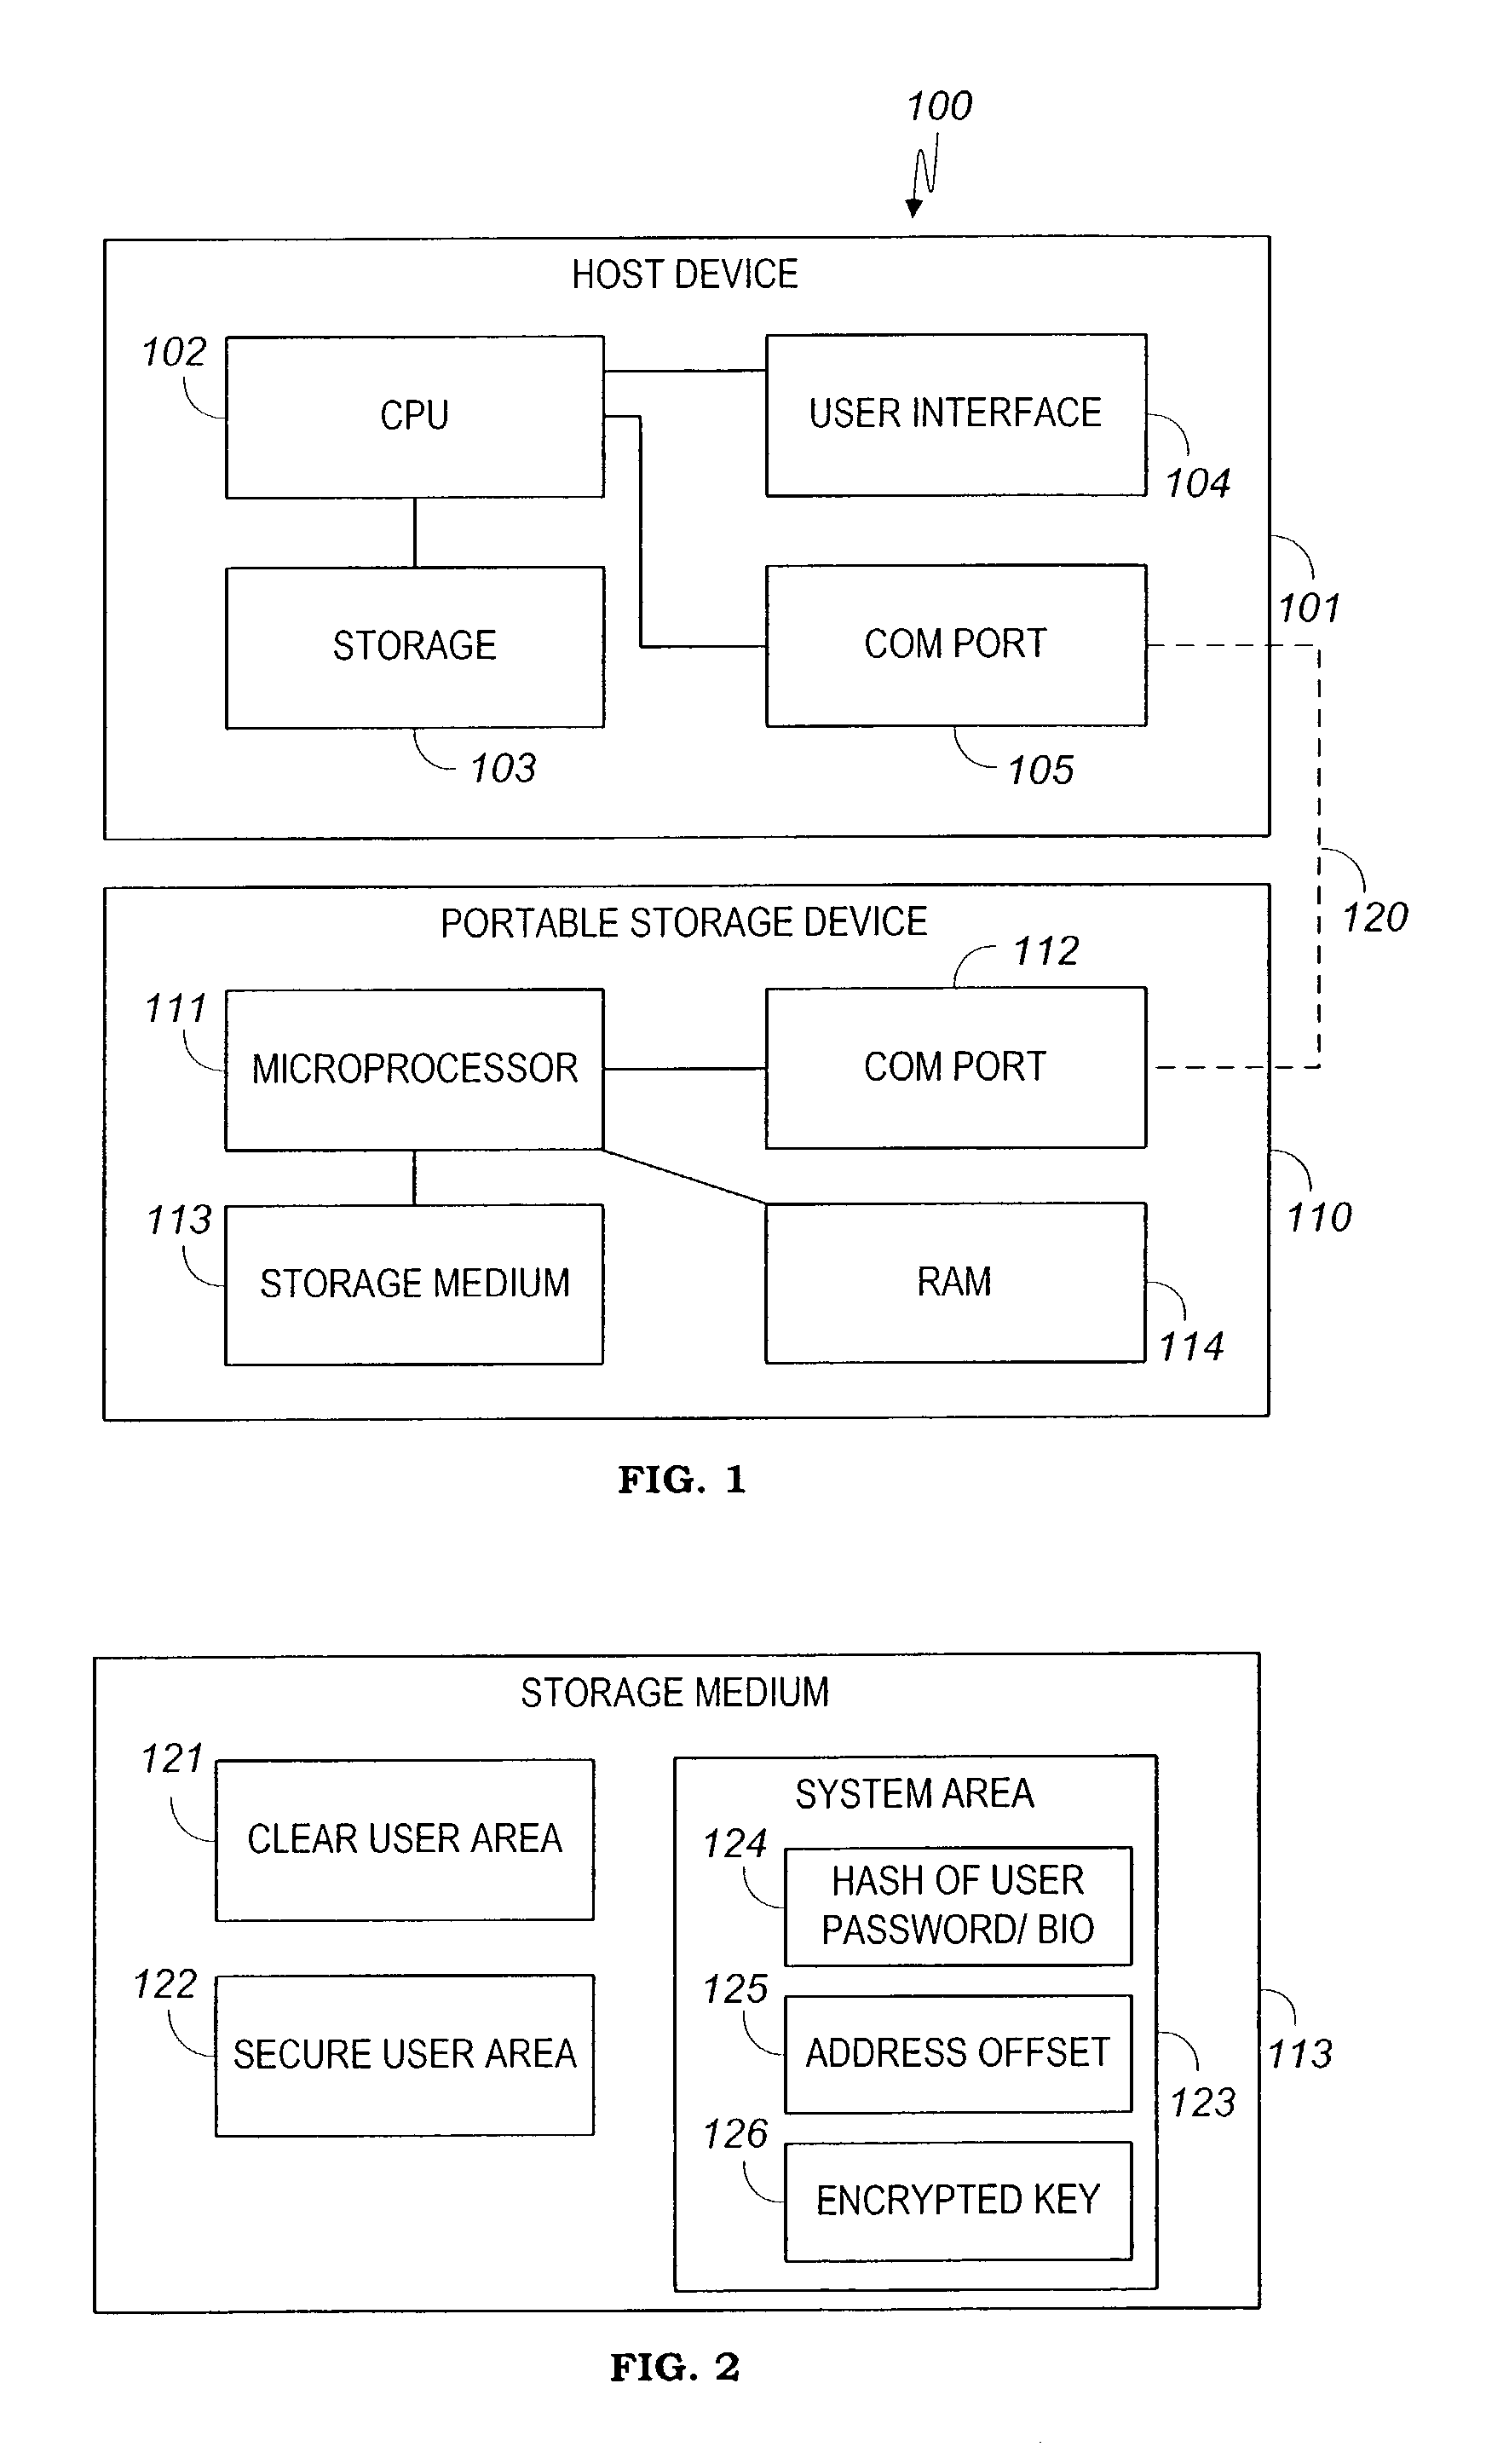 Apparatus and method for securing data on a portable storage device